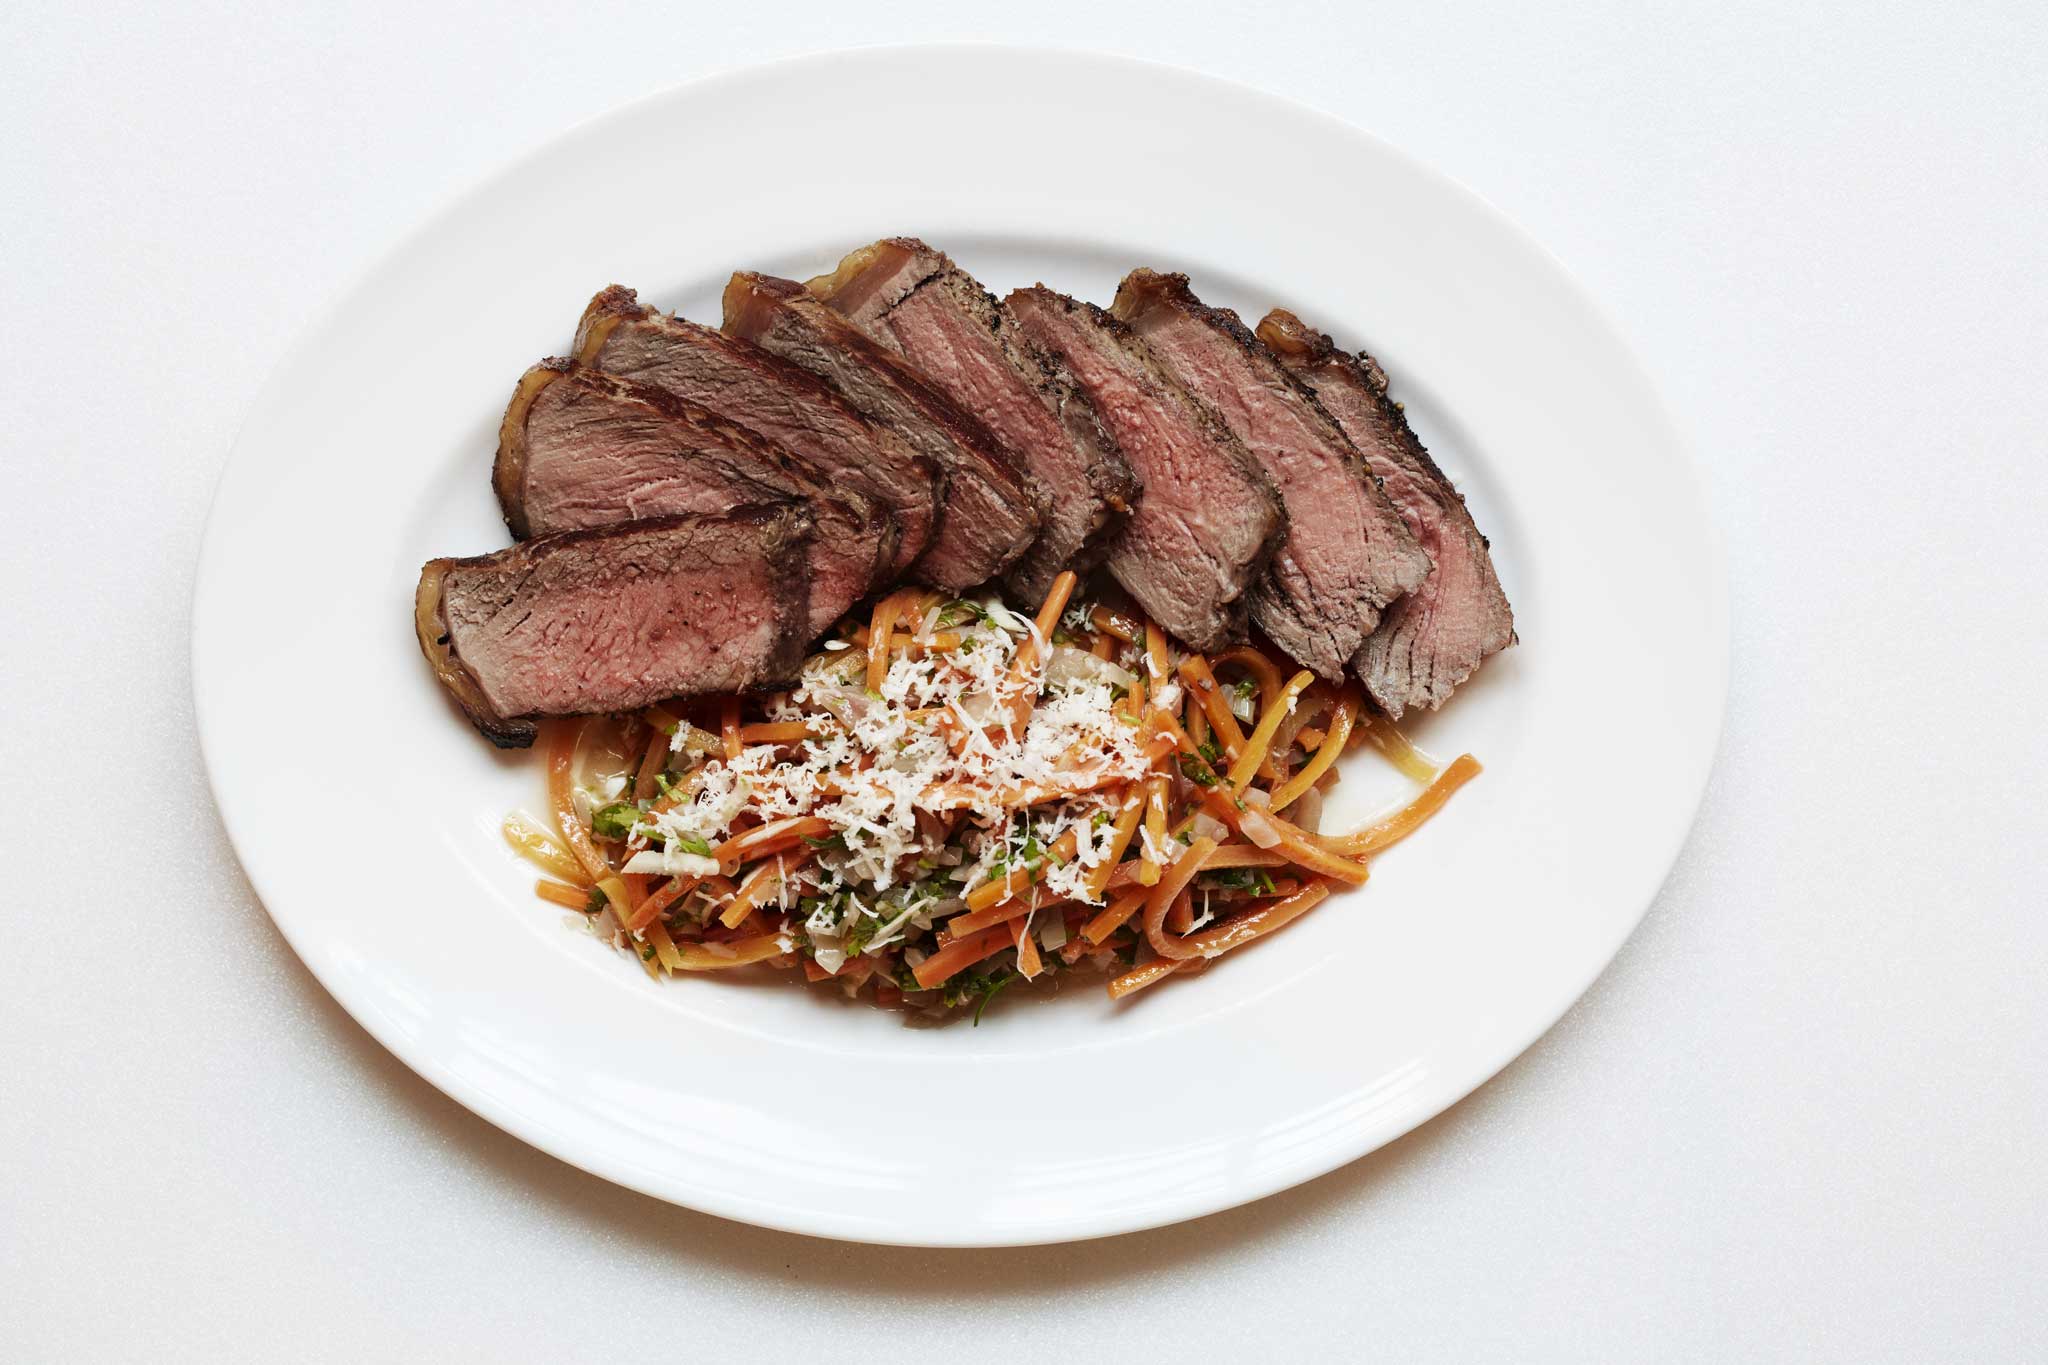 Herb-roasted sirloin with carrot and horseradish salad